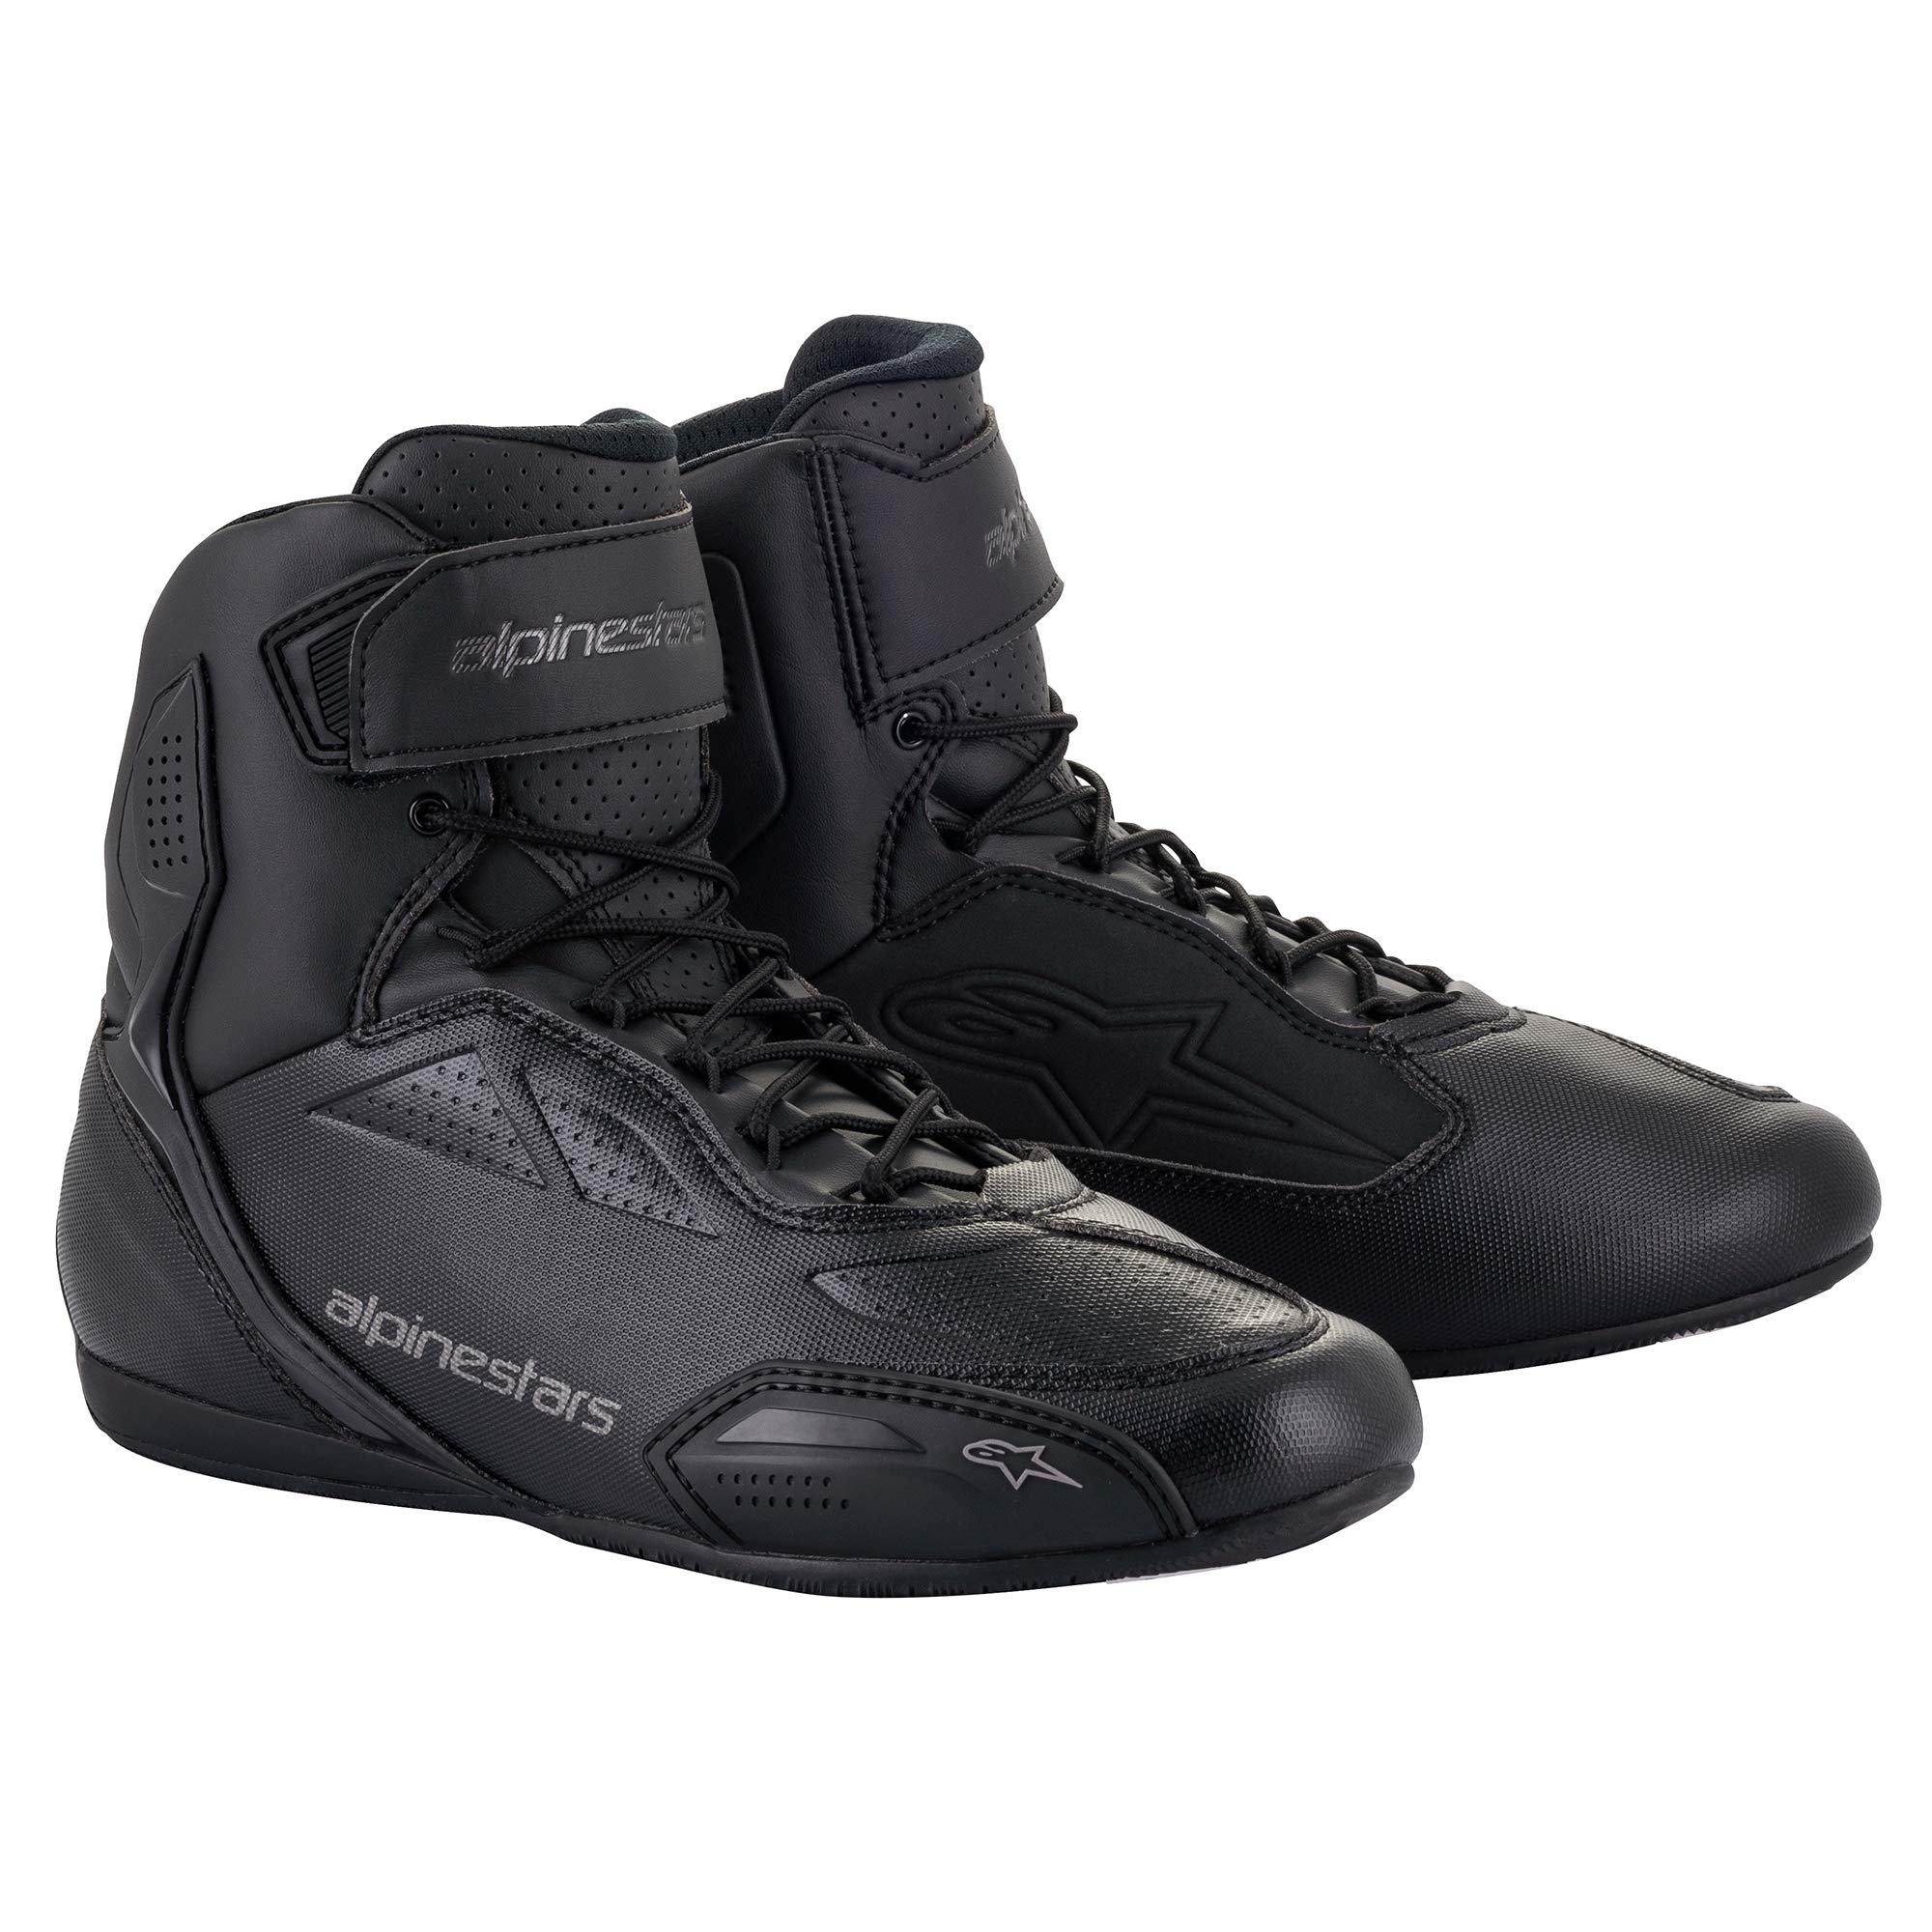 Alpinestars Faster 3 Shoes (Black/Cool Gray, Numeric_7_Point_5)